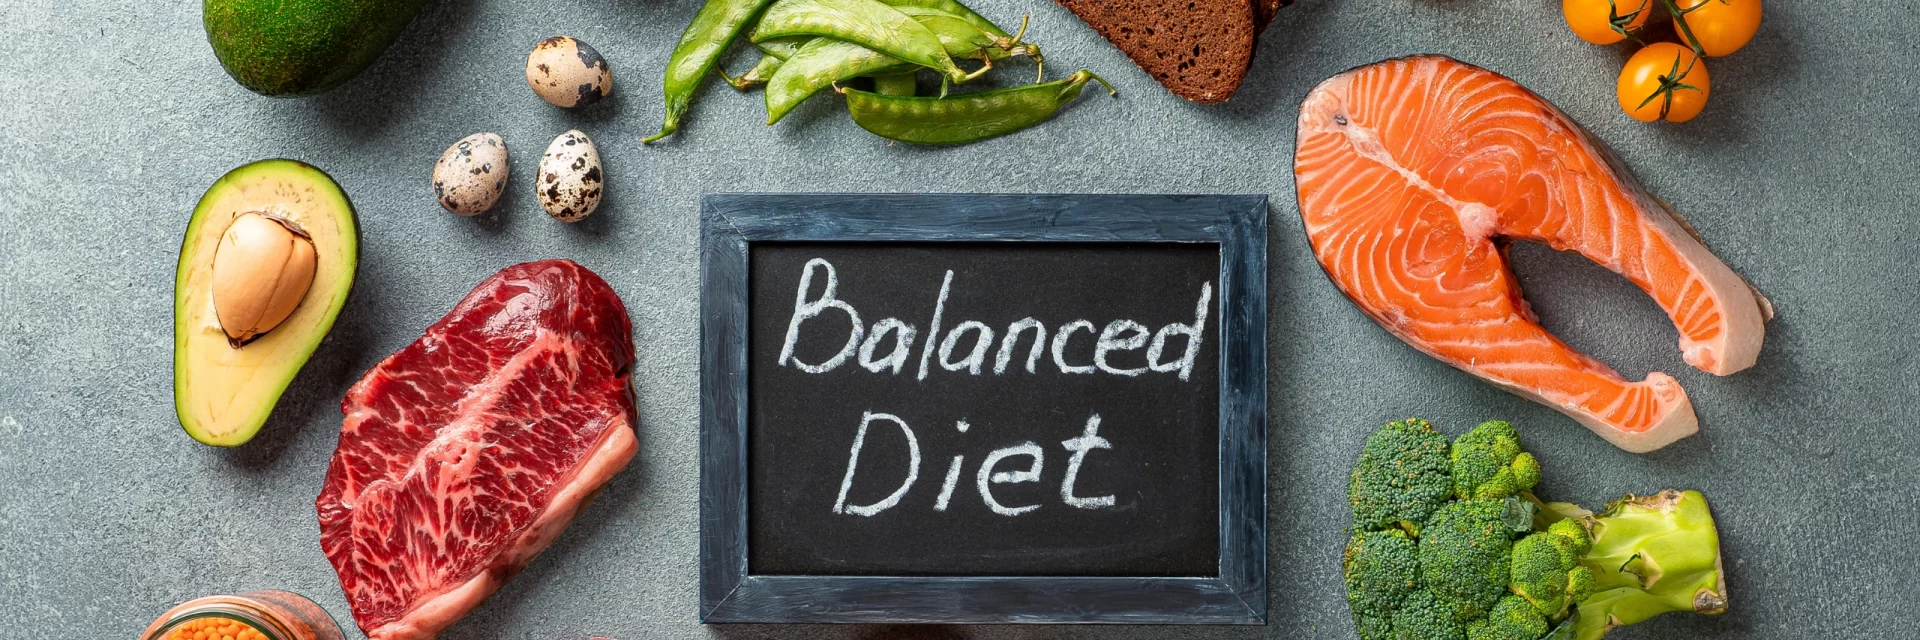 Ideal Balanced Diet: What Should You Really Eat? - NDTV Food